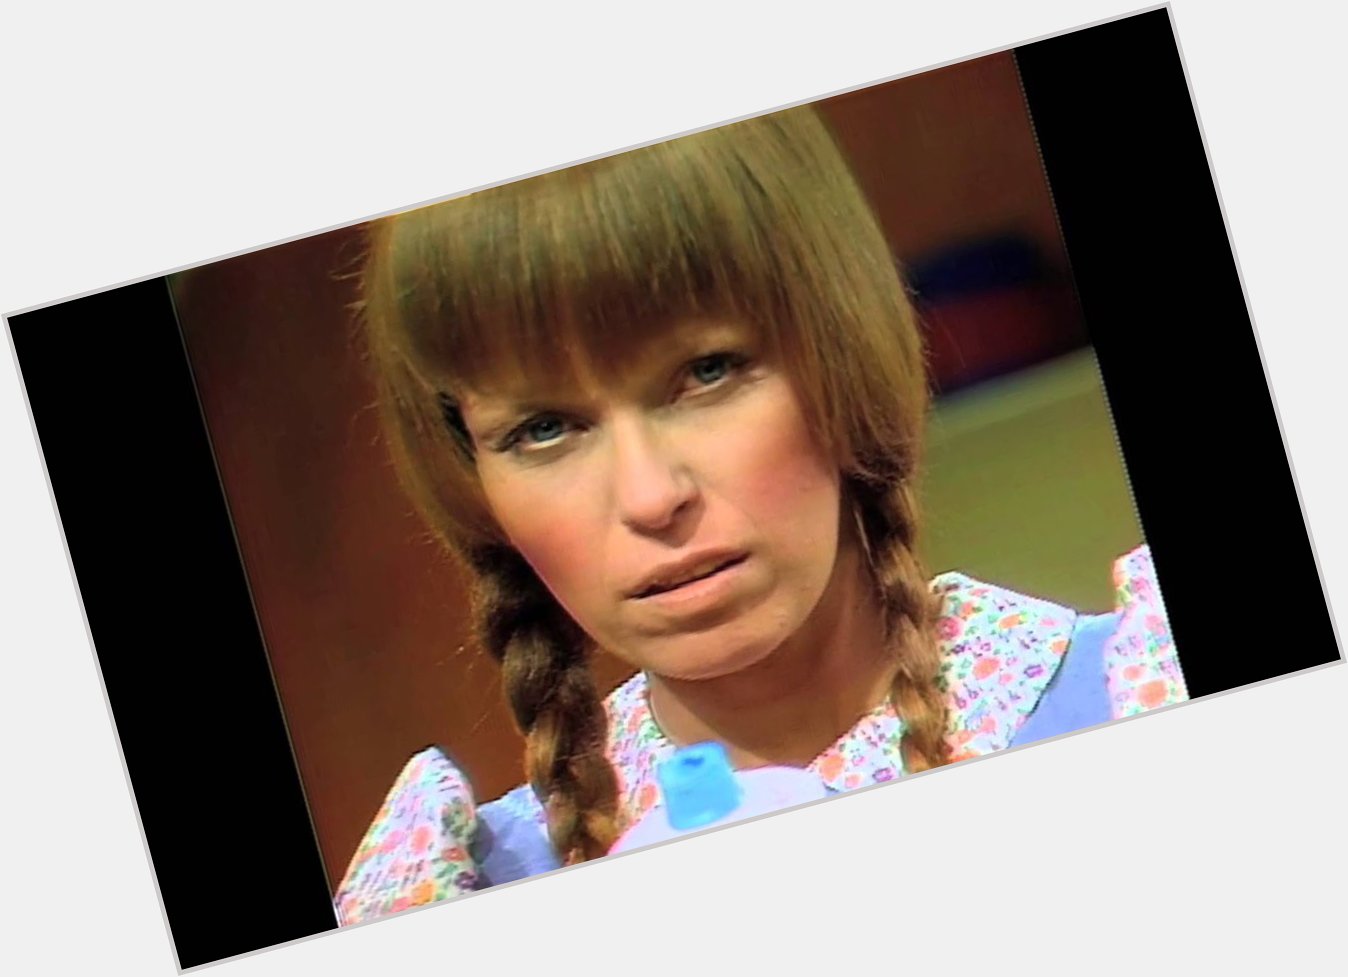 APRIL 11: Happy Birthday to actress Louise Lasser! Does anyone remember this TV character she played in the 1970s??? 